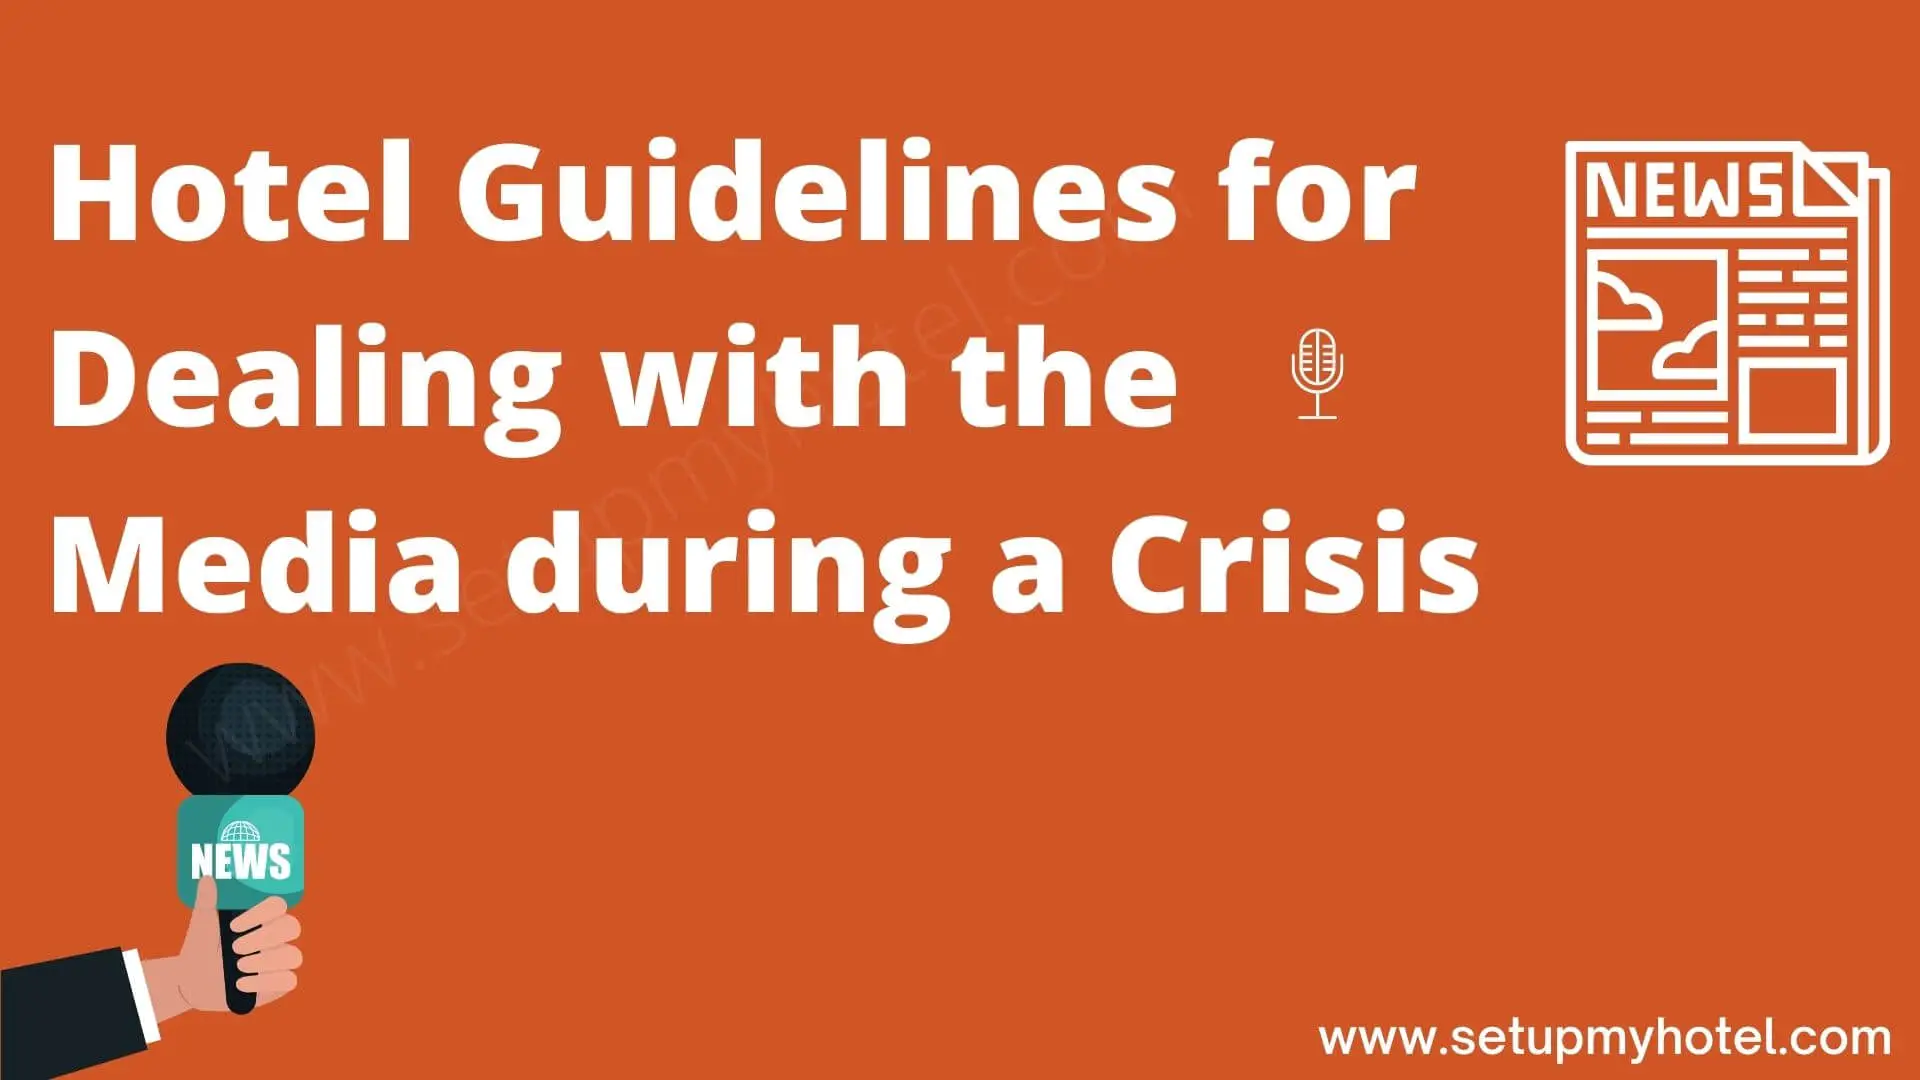 When a crisis occurs in a hotel, it's important to have a plan in place for how to handle the media. By following these guidelines, hotel staff can ensure that they are prepared to communicate effectively and efficiently in a time of crisis. Firstly, it's important to designate a spokesperson who will be responsible for communicating with the media. This person should be someone who is knowledgeable about the situation and who has received media training. Secondly, the hotel should have a clear message that they want to communicate to the media. This message should be consistent and should be communicated by the designated spokesperson. Thirdly, the hotel should be proactive in reaching out to the media. This can include issuing a press release, holding a press conference, or conducting interviews with reporters. Fourthly, it's important to be honest and transparent with the media. This means providing accurate information about the situation and being willing to answer tough questions. Finally, the hotel should be prepared to respond quickly to media inquiries. This means having a system in place for monitoring media coverage and responding to media requests in a timely manner. By following these guidelines, hotels can effectively manage their communication with the media during a crisis and ensure that their message is heard loud and clear.